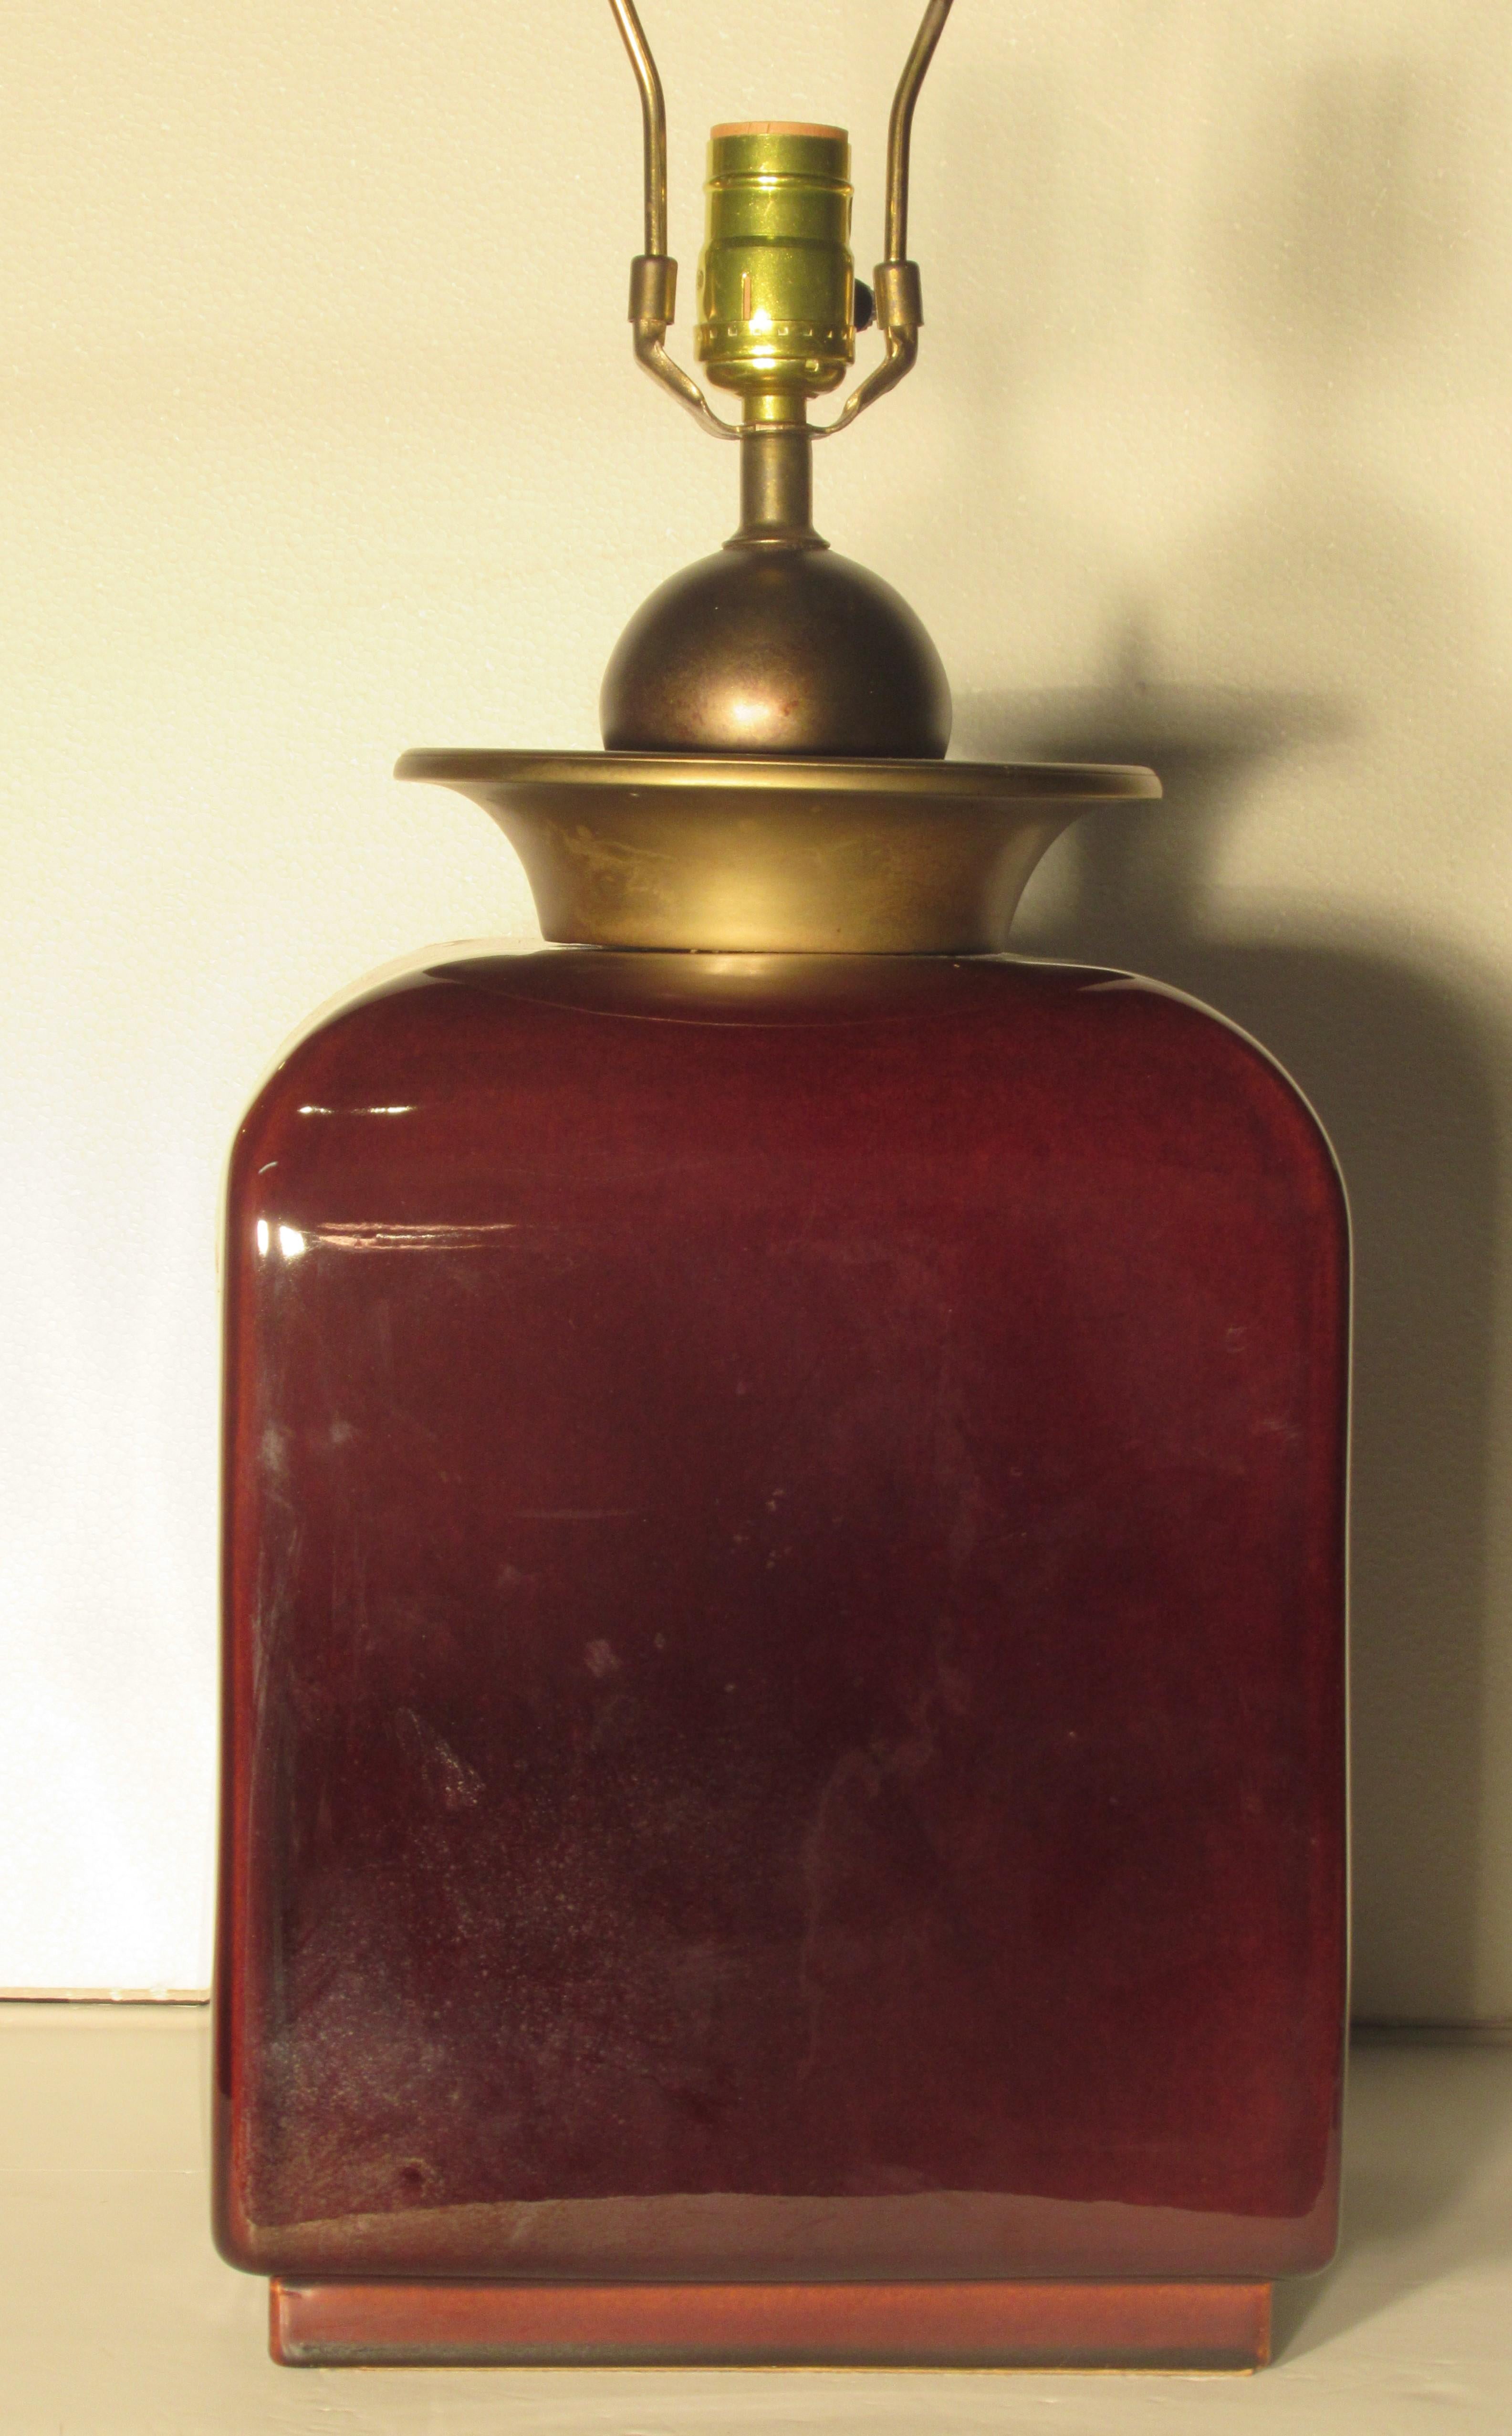 Asian Modern / Hollywood Regency oxblood high glazed ceramic lamp with unusual large brass ball and saucer decoration at top. Measures 9